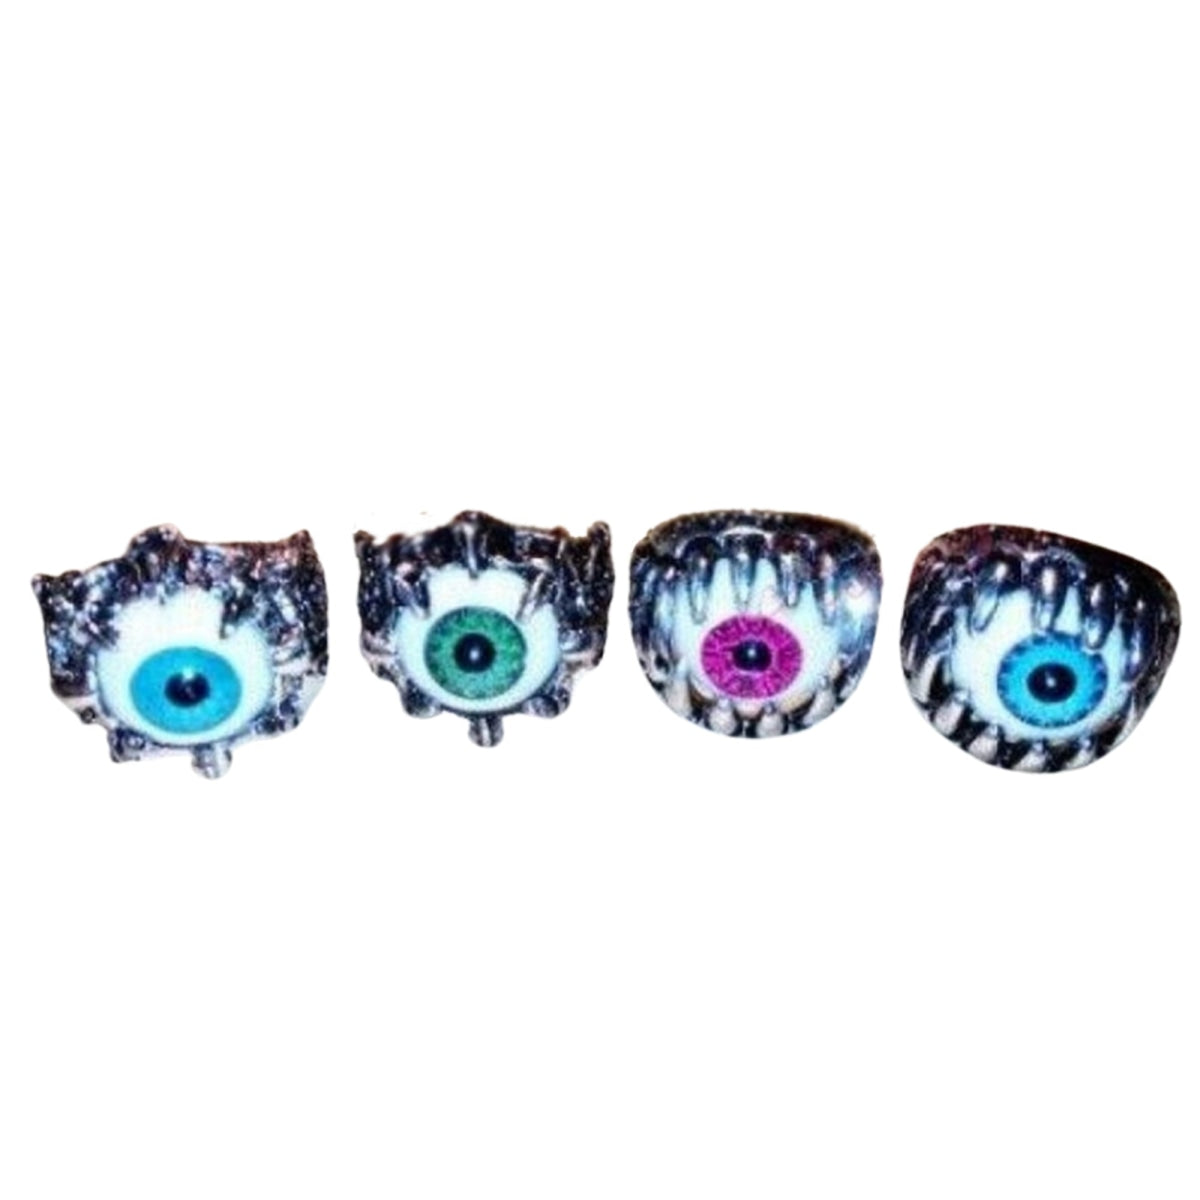 Eyeball Ring Eyeballs Rings Claw Claws Pink Blue Green Size Sizes 8-11